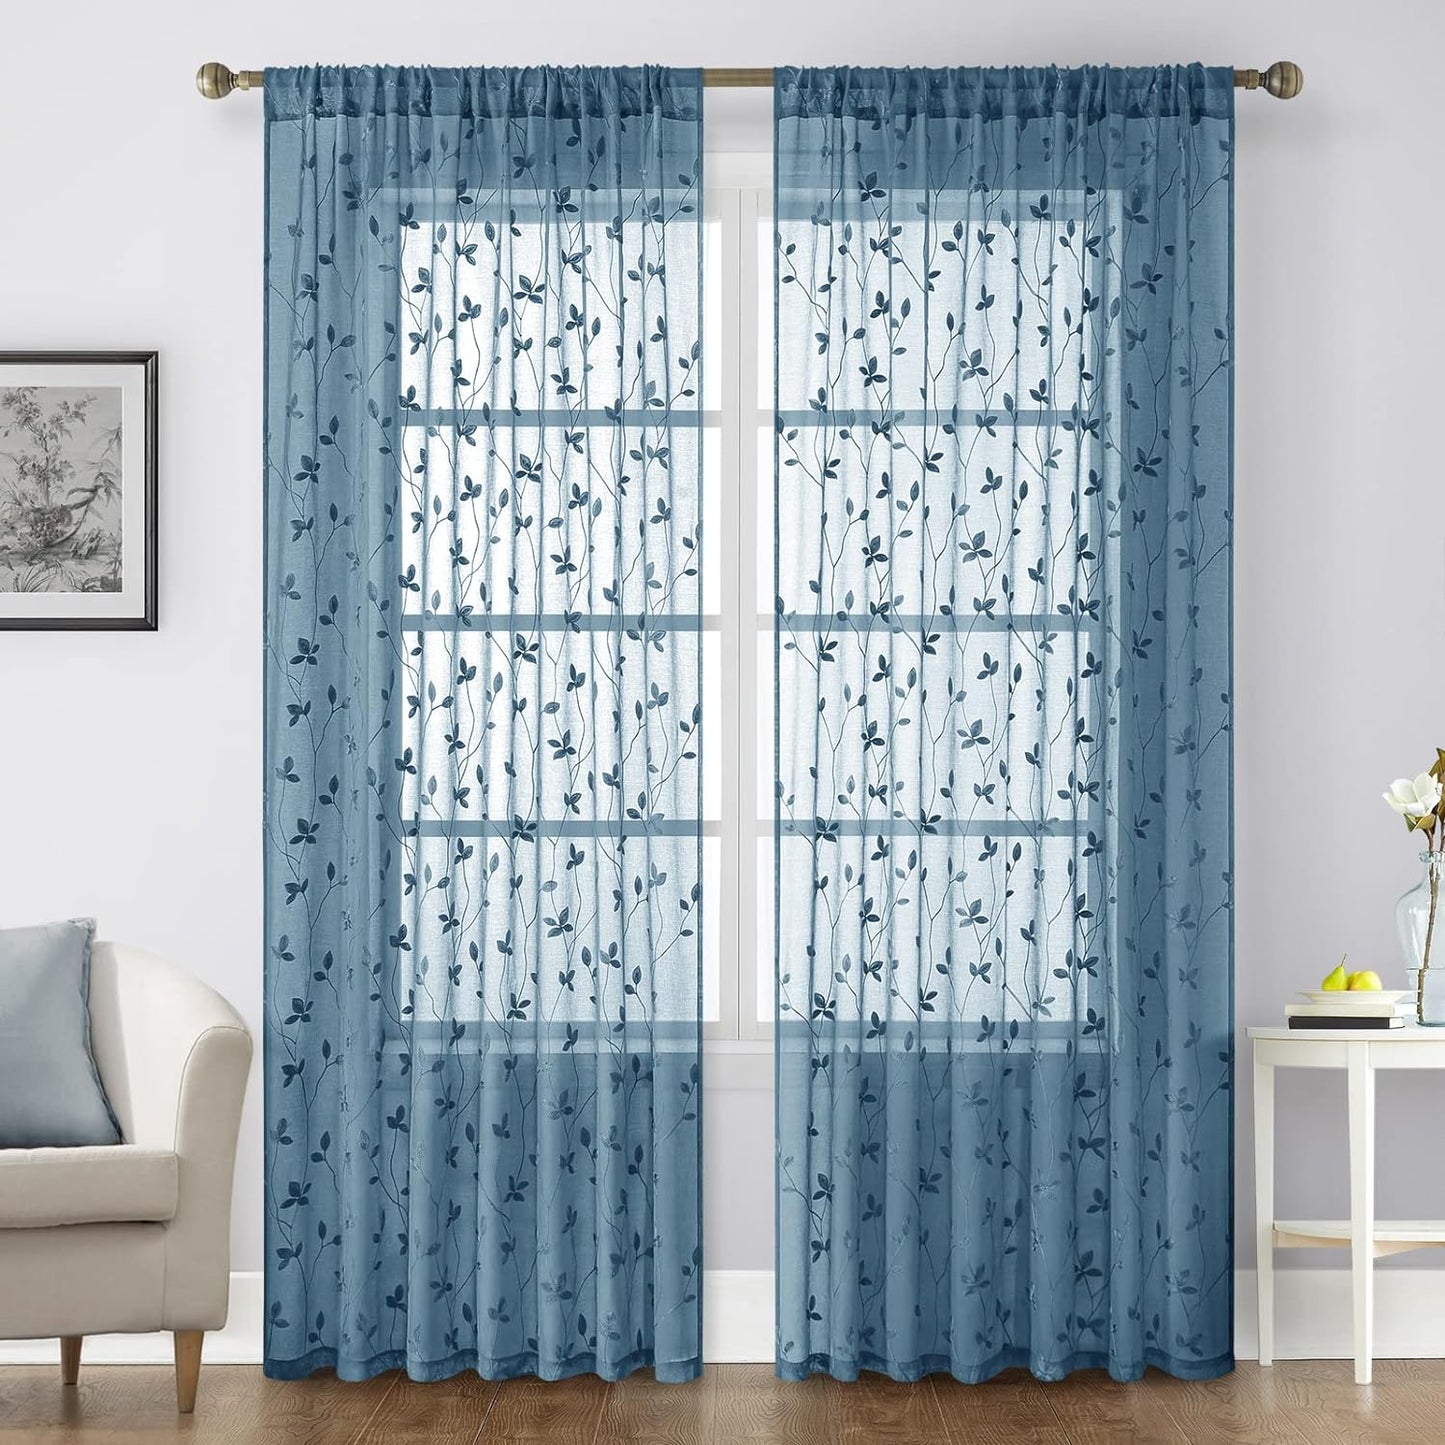 HOMEIDEAS Sage Green Sheer Curtains 52 X 63 Inches Length 2 Panels Embroidered Leaf Pattern Pocket Faux Linen Floral Semi Sheer Voile Window Curtains/Drapes for Bedroom Living Room  HOMEIDEAS Cyan Blue W52" X L96" 